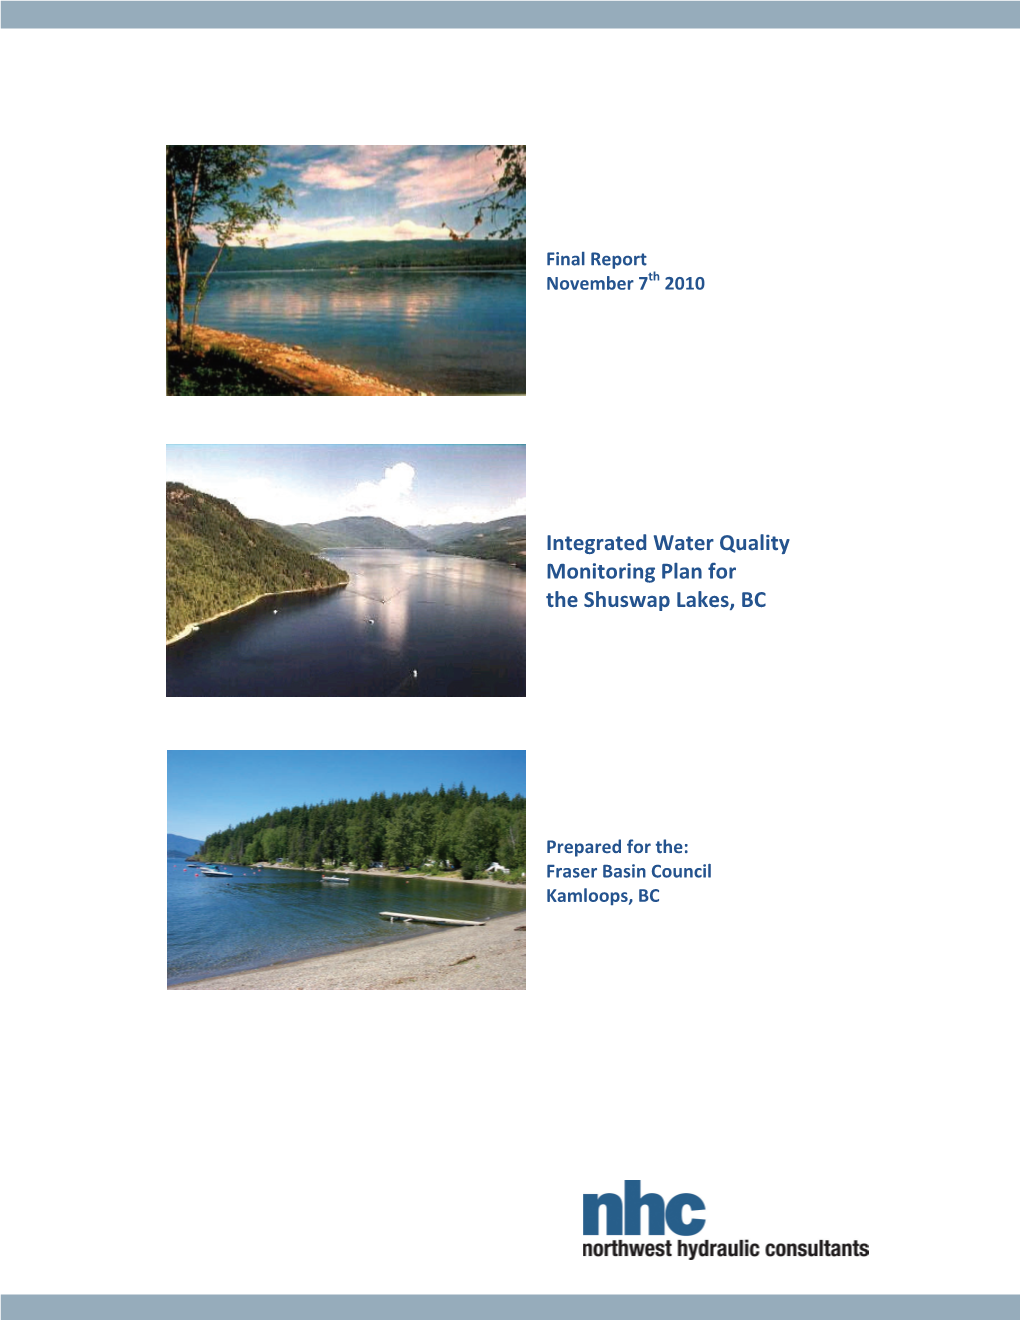 Integrated Water Quality Monitoring Plan for the Shuswap Lakes, BC